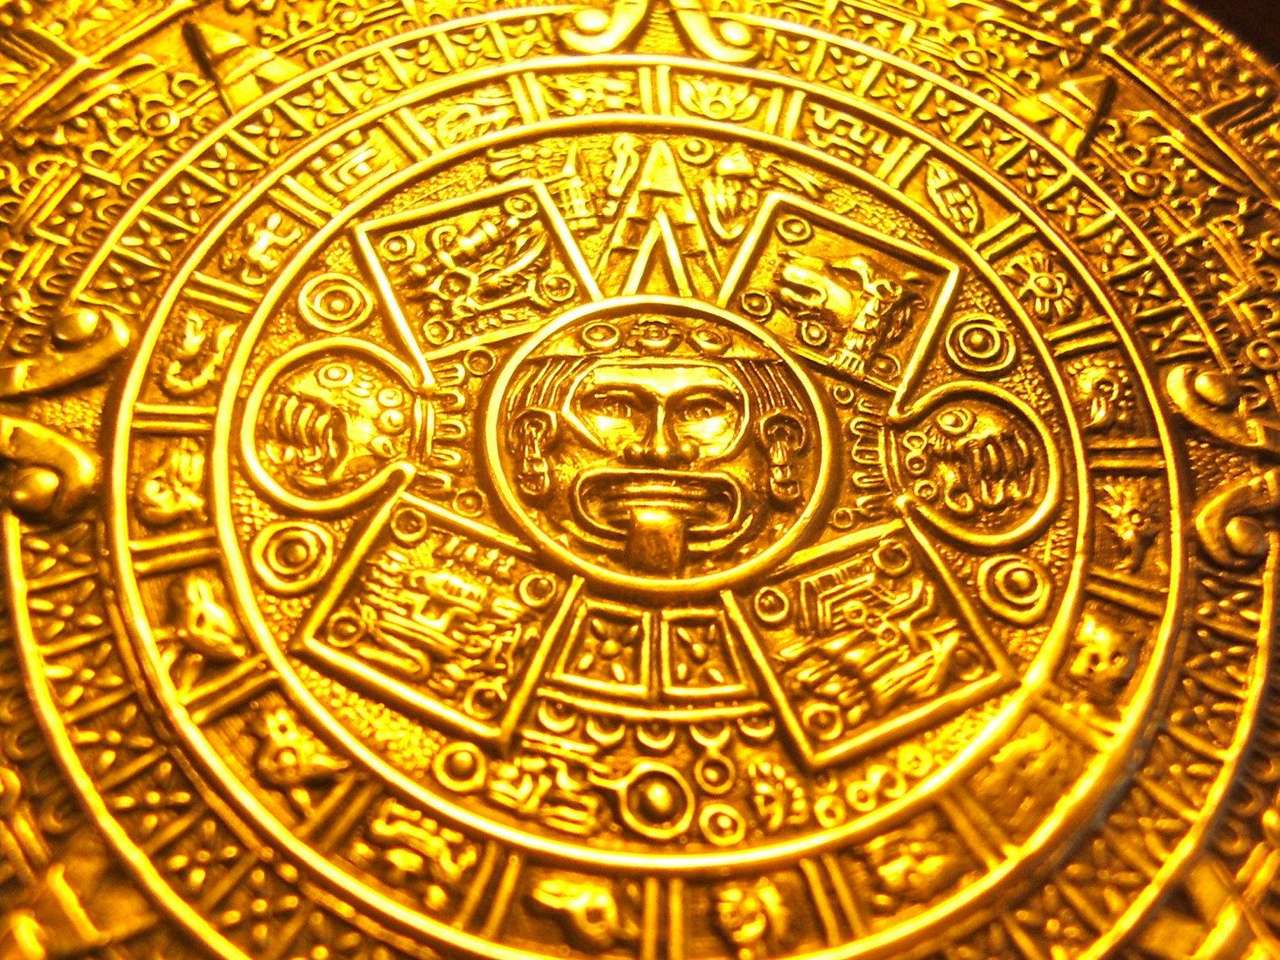 The Mayan Calendar online puzzle